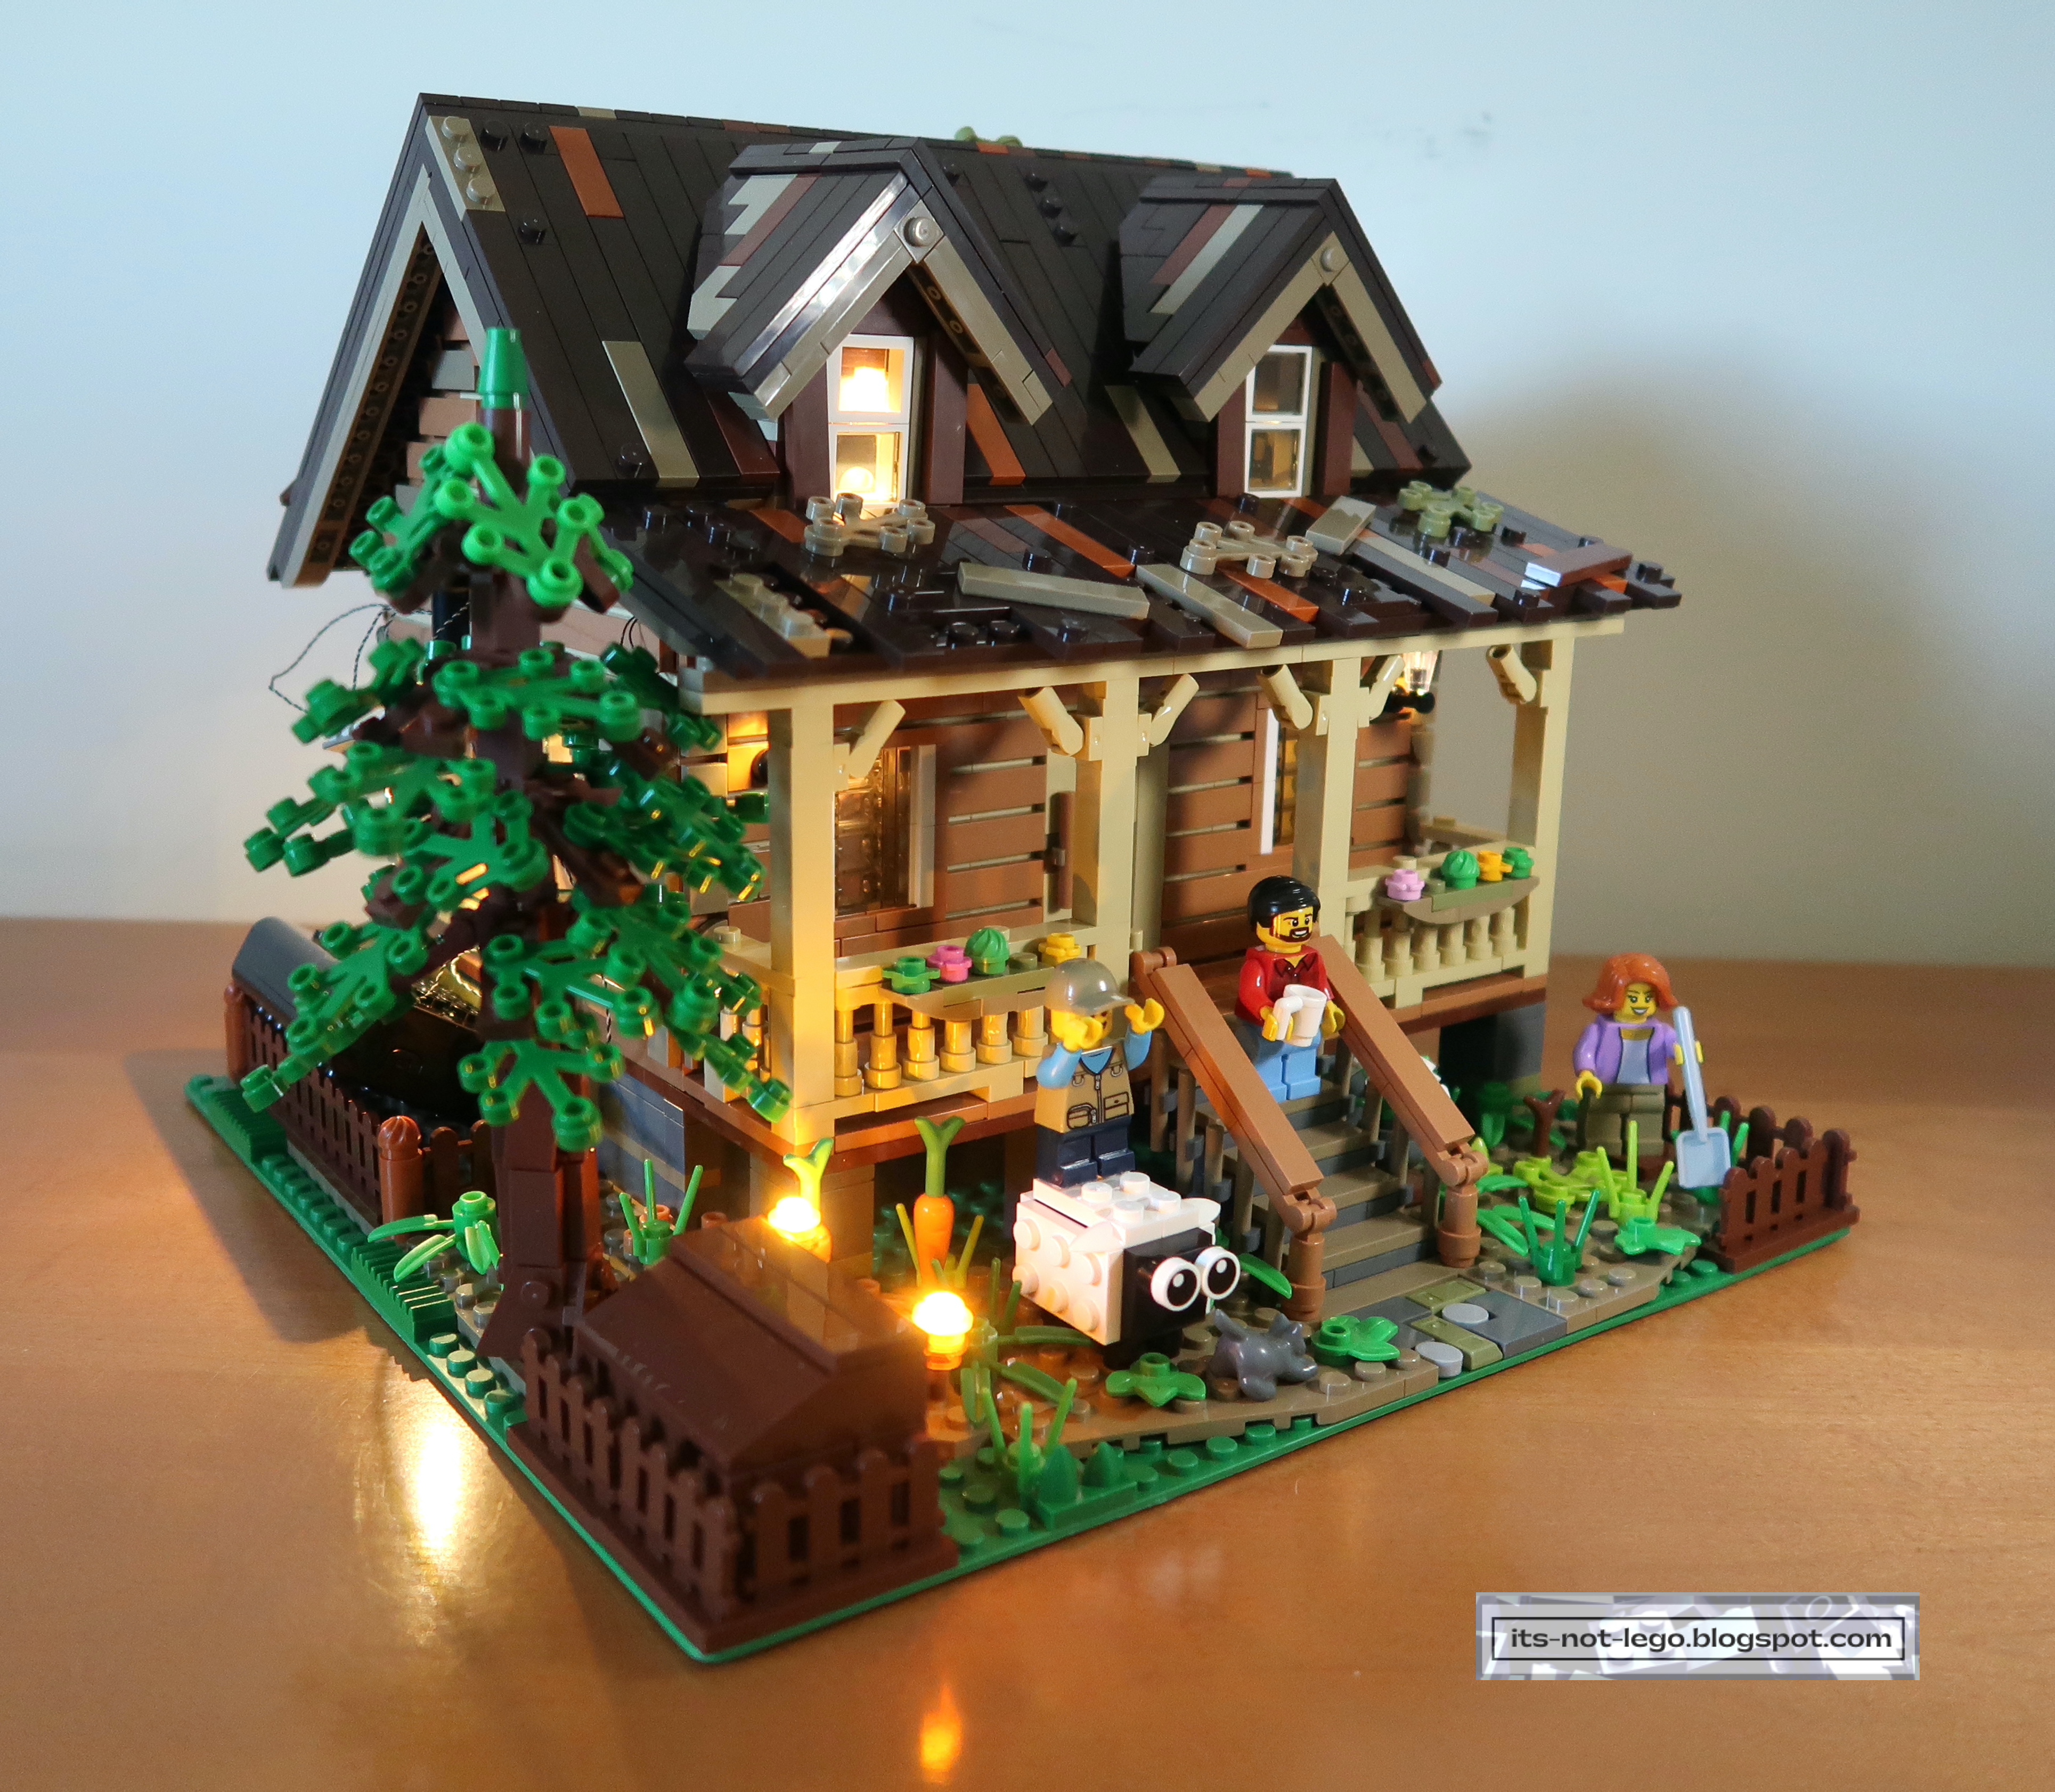 It's Not Lego: Funwhole Wood Cabin Building Set Review FH-9001